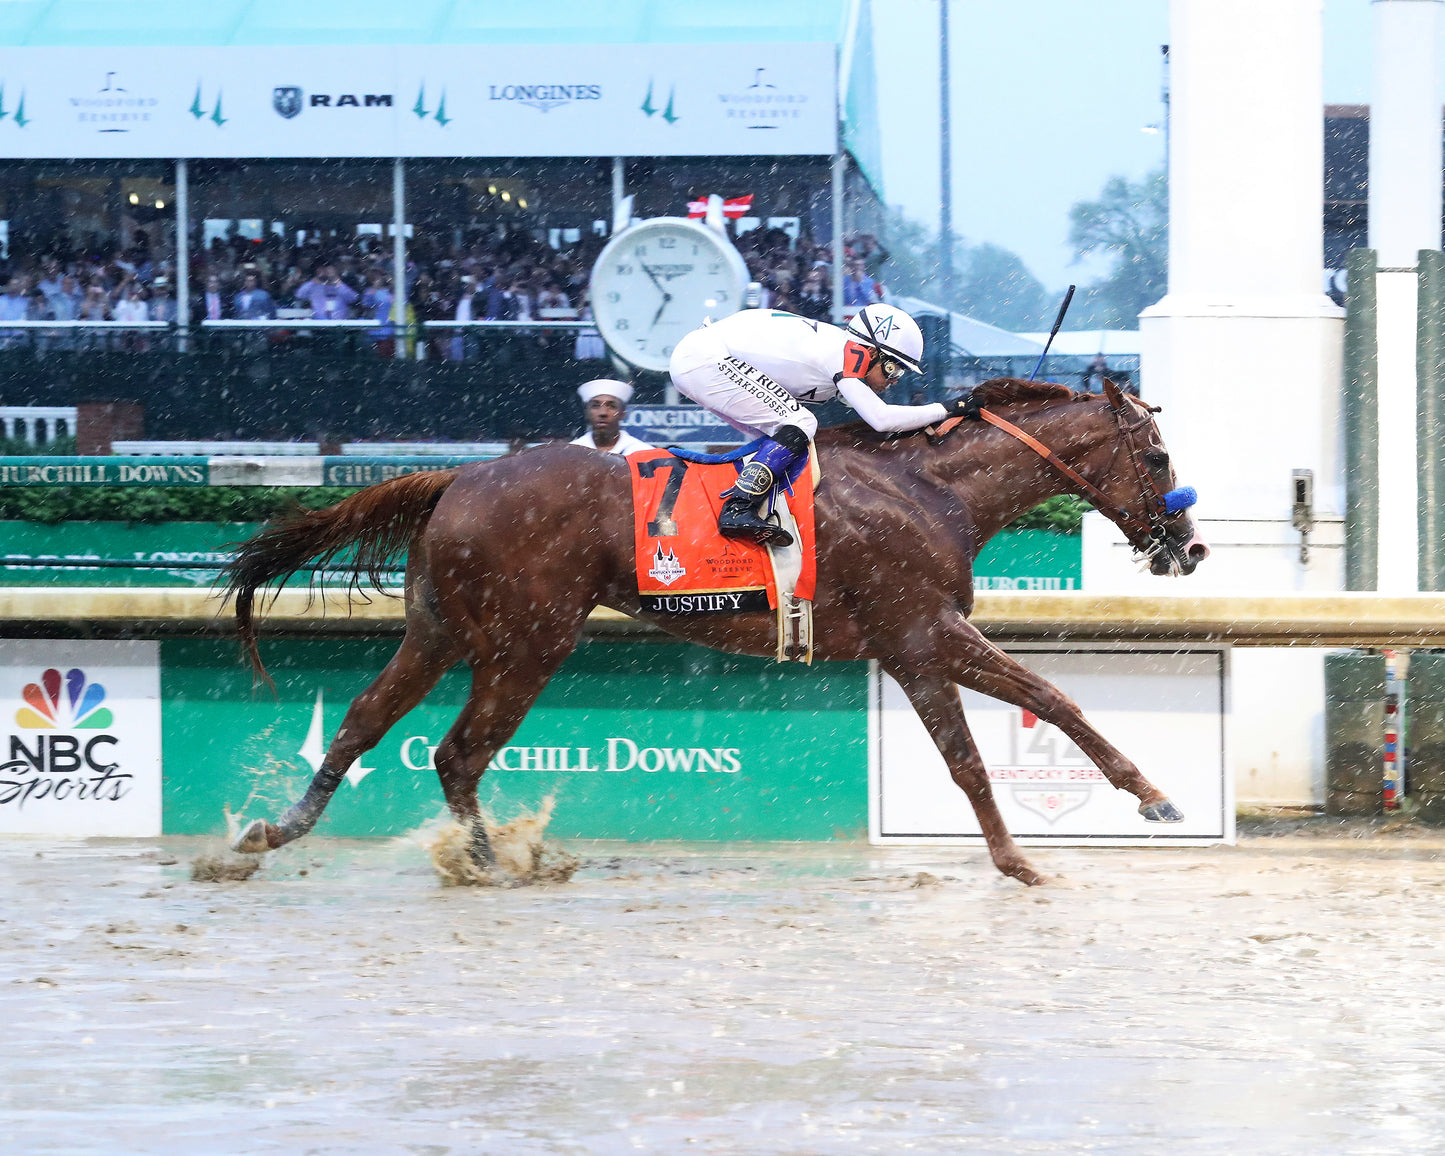 JUSTIFY - 050518 - Race 12 - CD The Kentucky Derby G1 - Finish 1